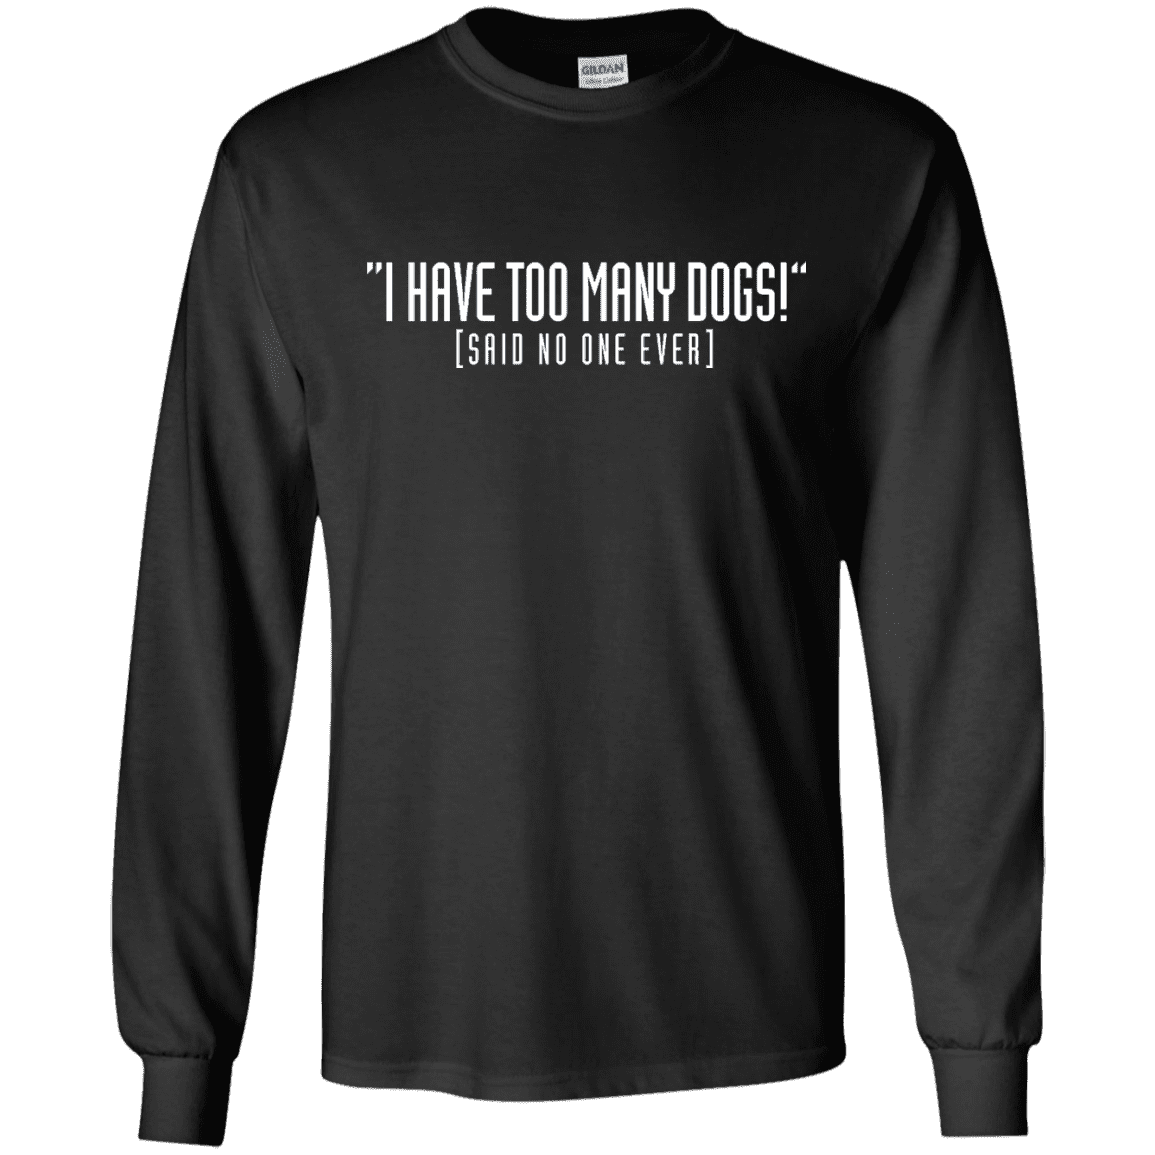 I Have Too Many Dogs - Long Sleeve T Shirt.